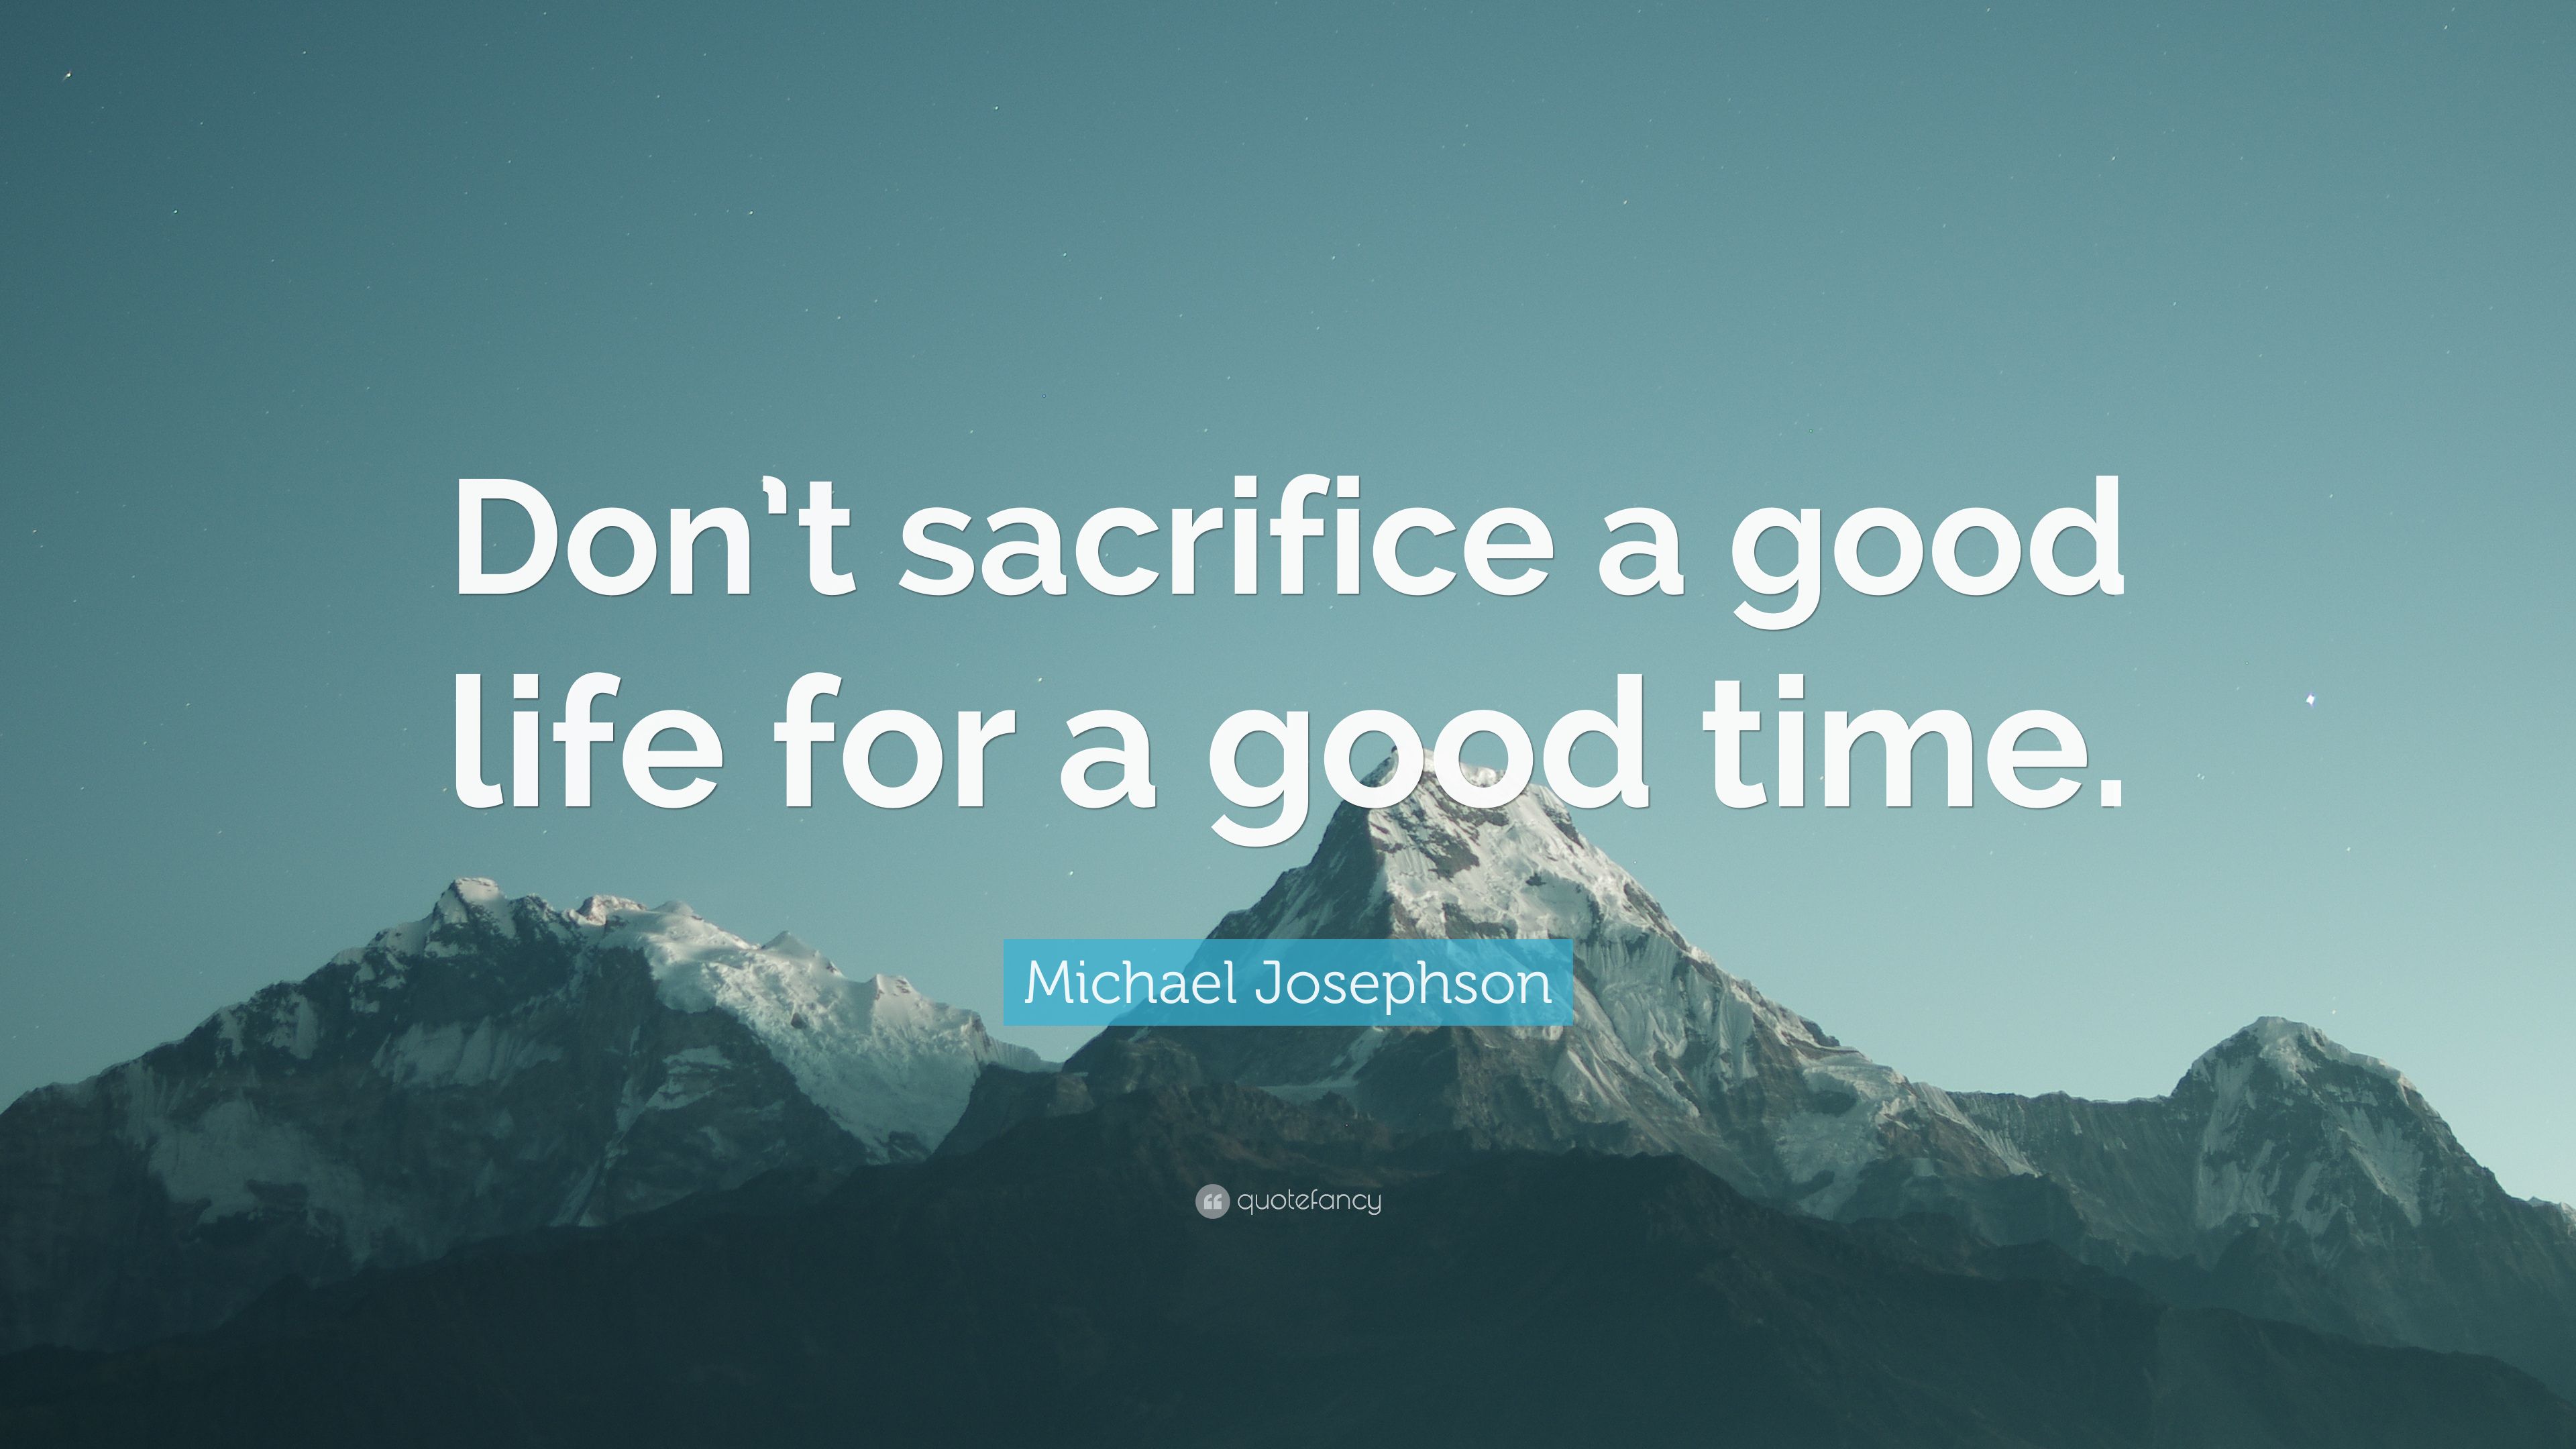 Michael Josephson Quote: “Don't sacrifice a good life for a good time.” (7 wallpaper)